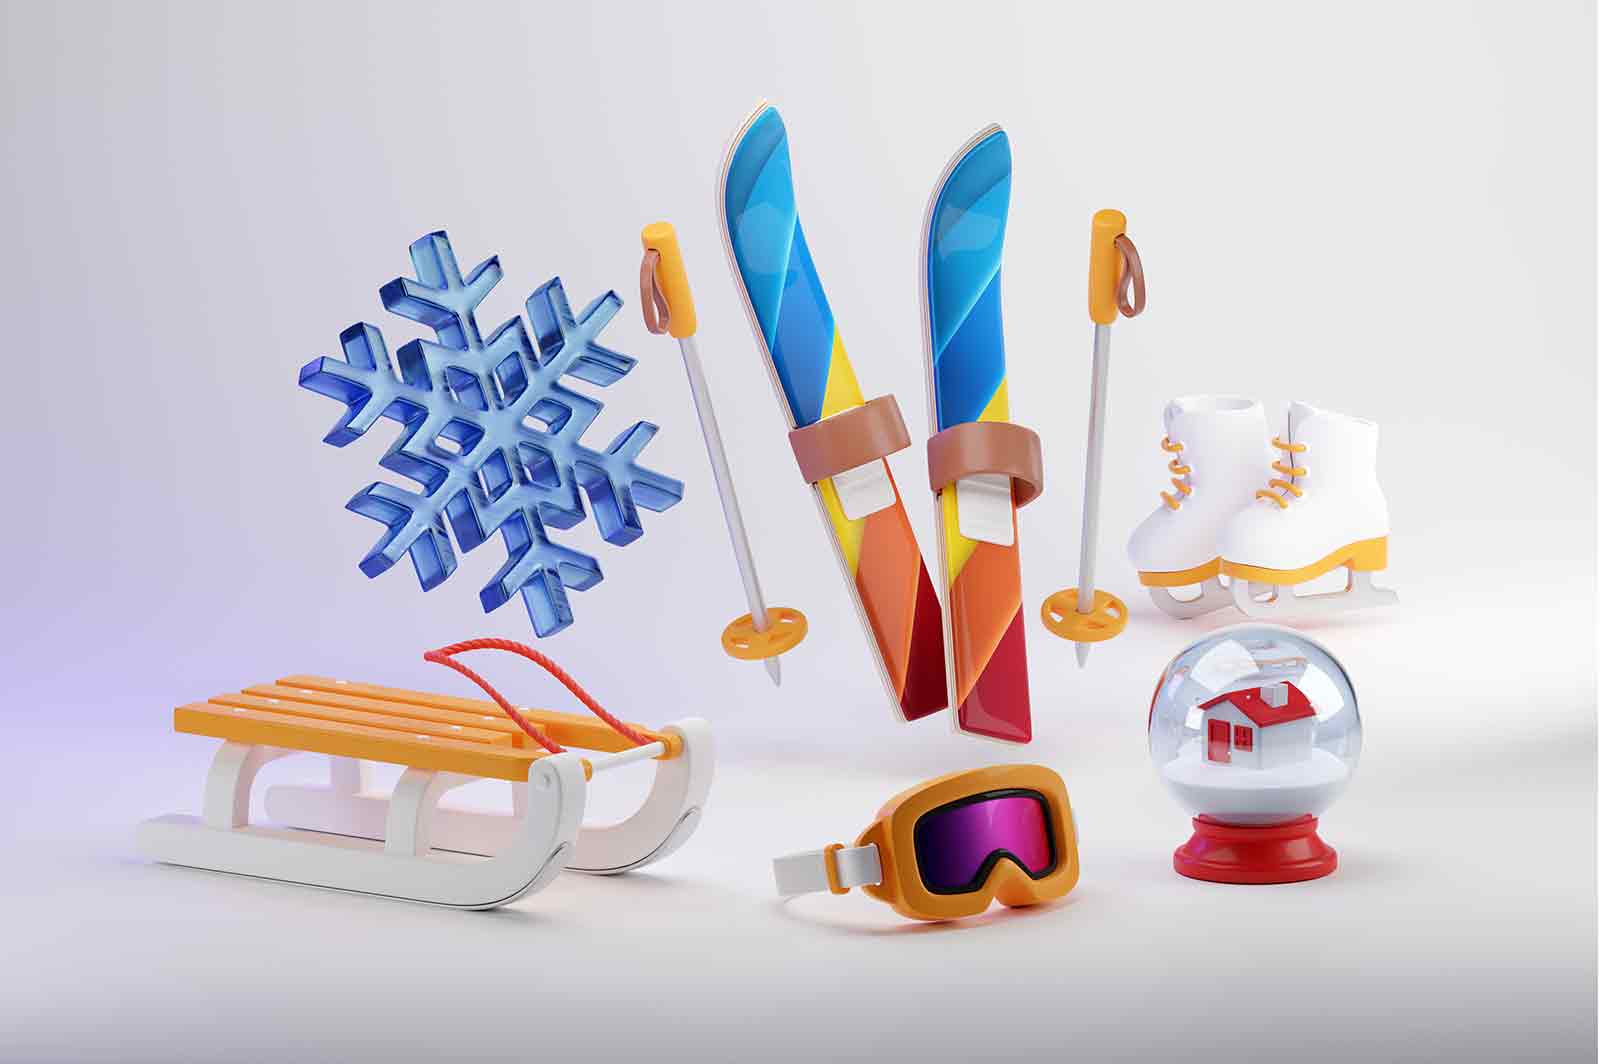 Winter objects 3d rendered illustration. Equipment for spending time in the winter season.